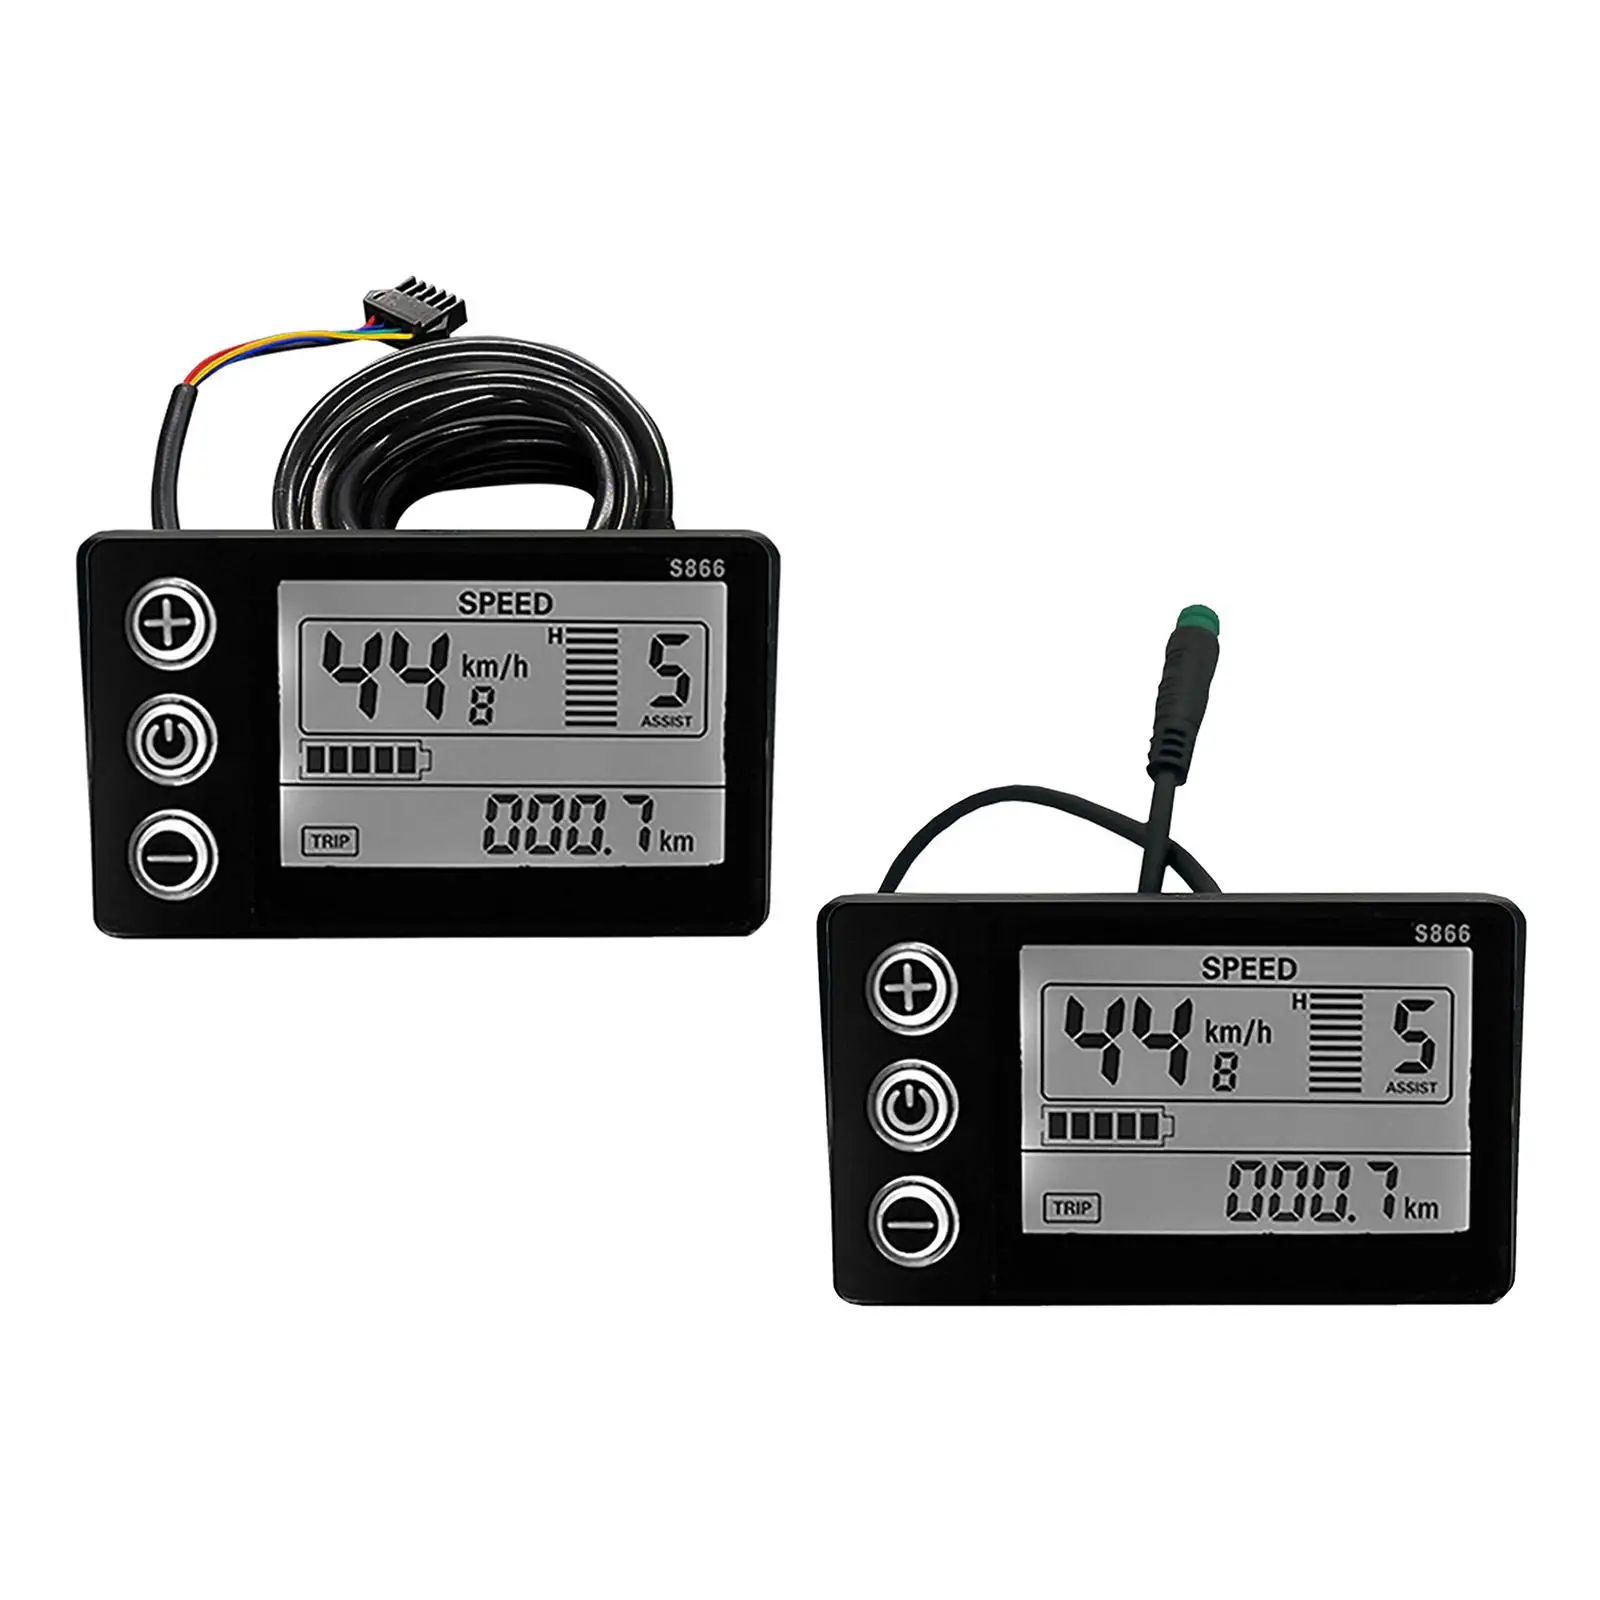 1x LCD S866 Display Panel Dashboard Throttle Accs Plastic for E-Bike Scooter